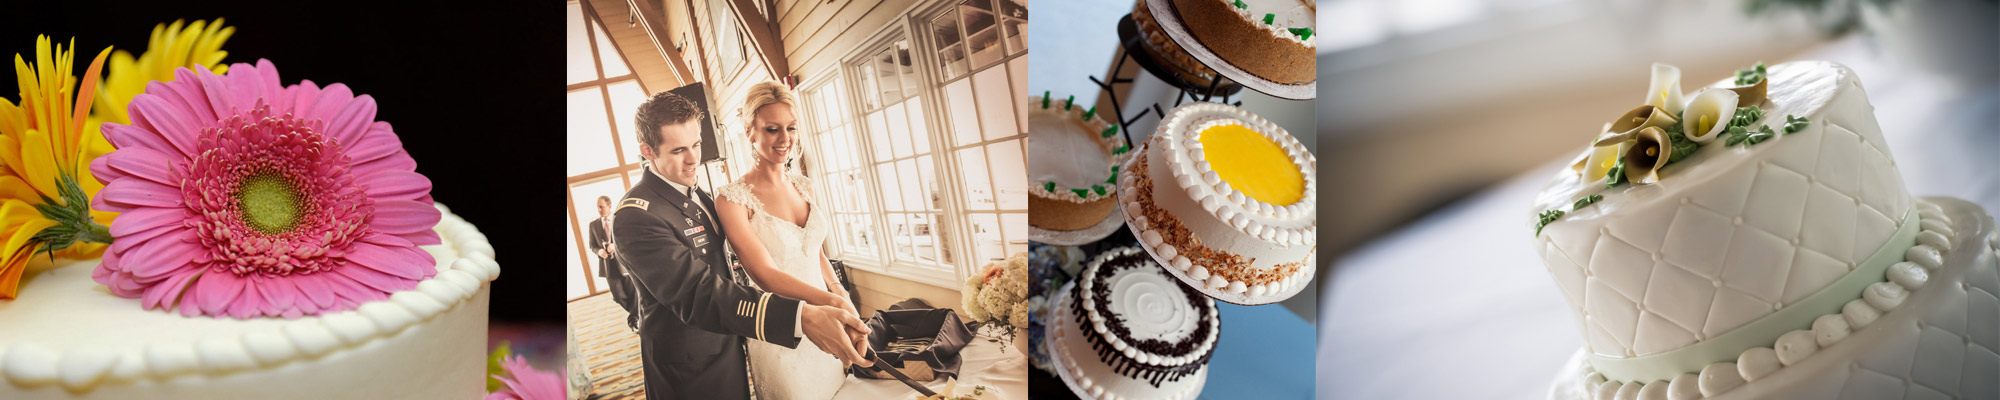 Main and Market bakes the best wedding cakes in the area